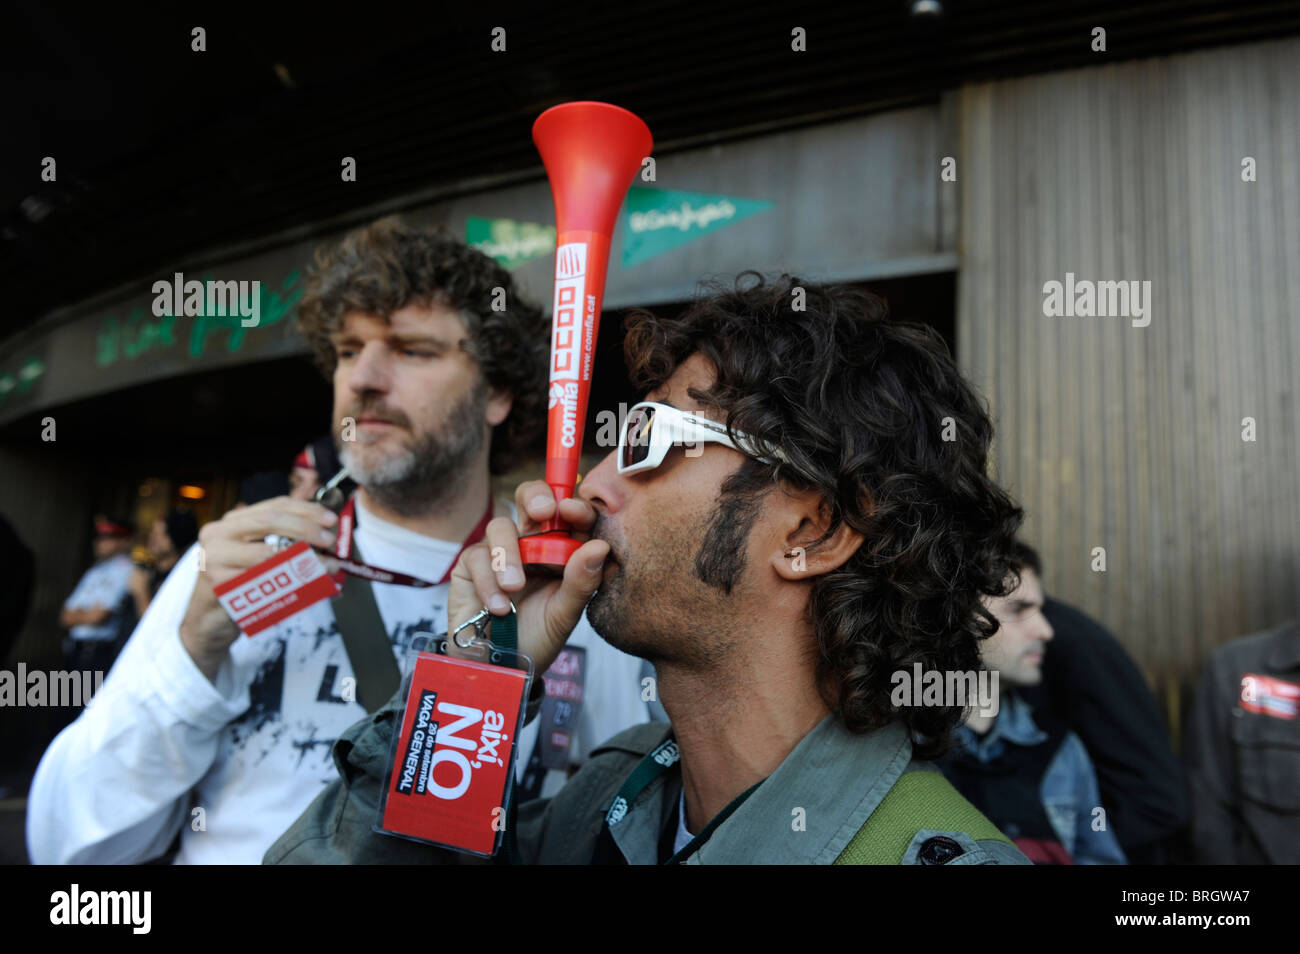 Barcelona, September,29. Picket line on the big store El Corte Ingles at the city center during the general strike in Spain.. Stock Photo